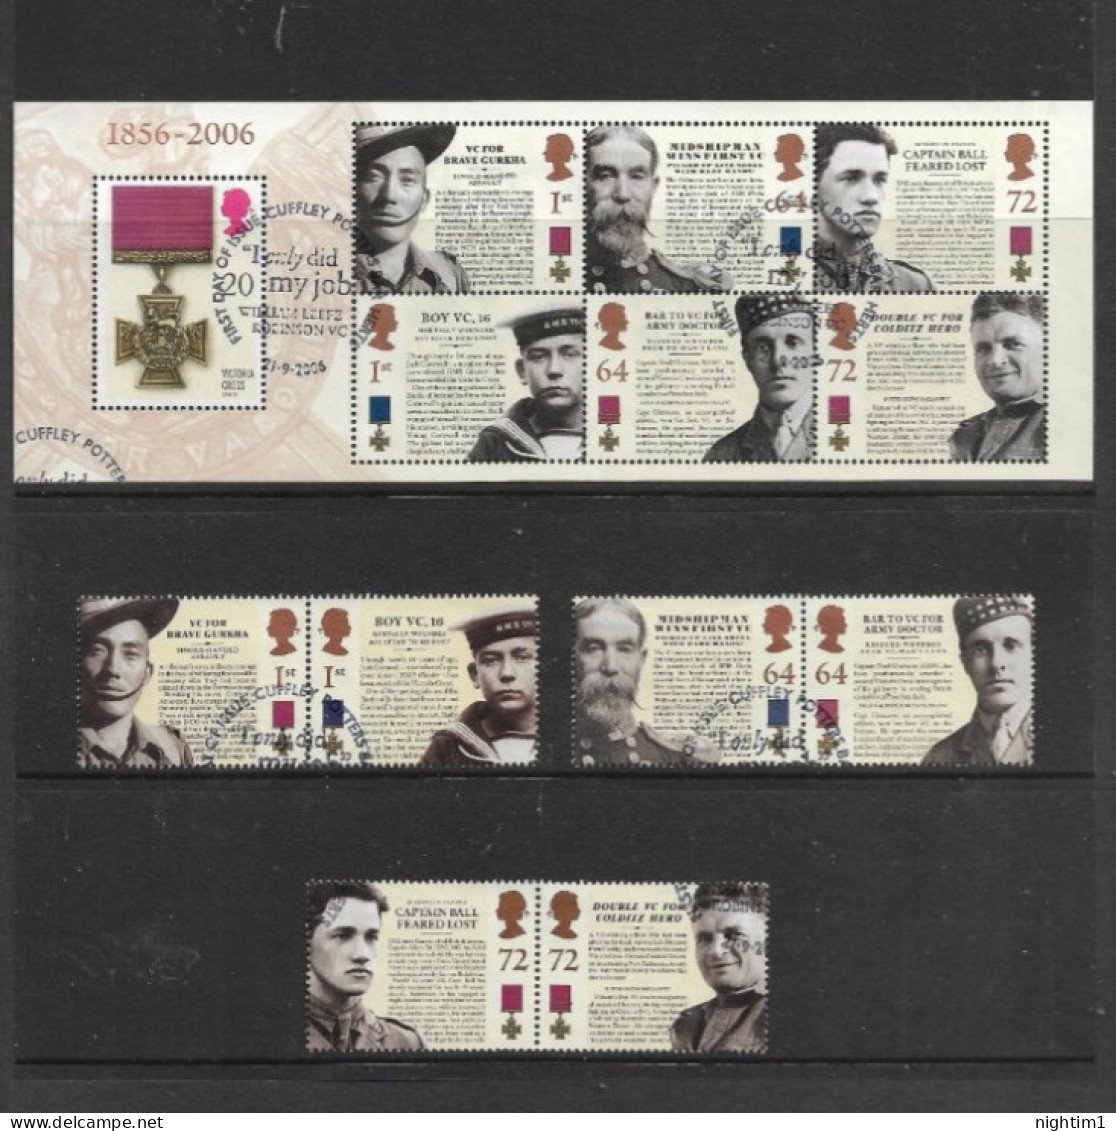 GREAT BRITAIN COLLECTION. VICTORIA CROSS SET OF 6 AND SOUVENIR SHEET. USED. - Usati